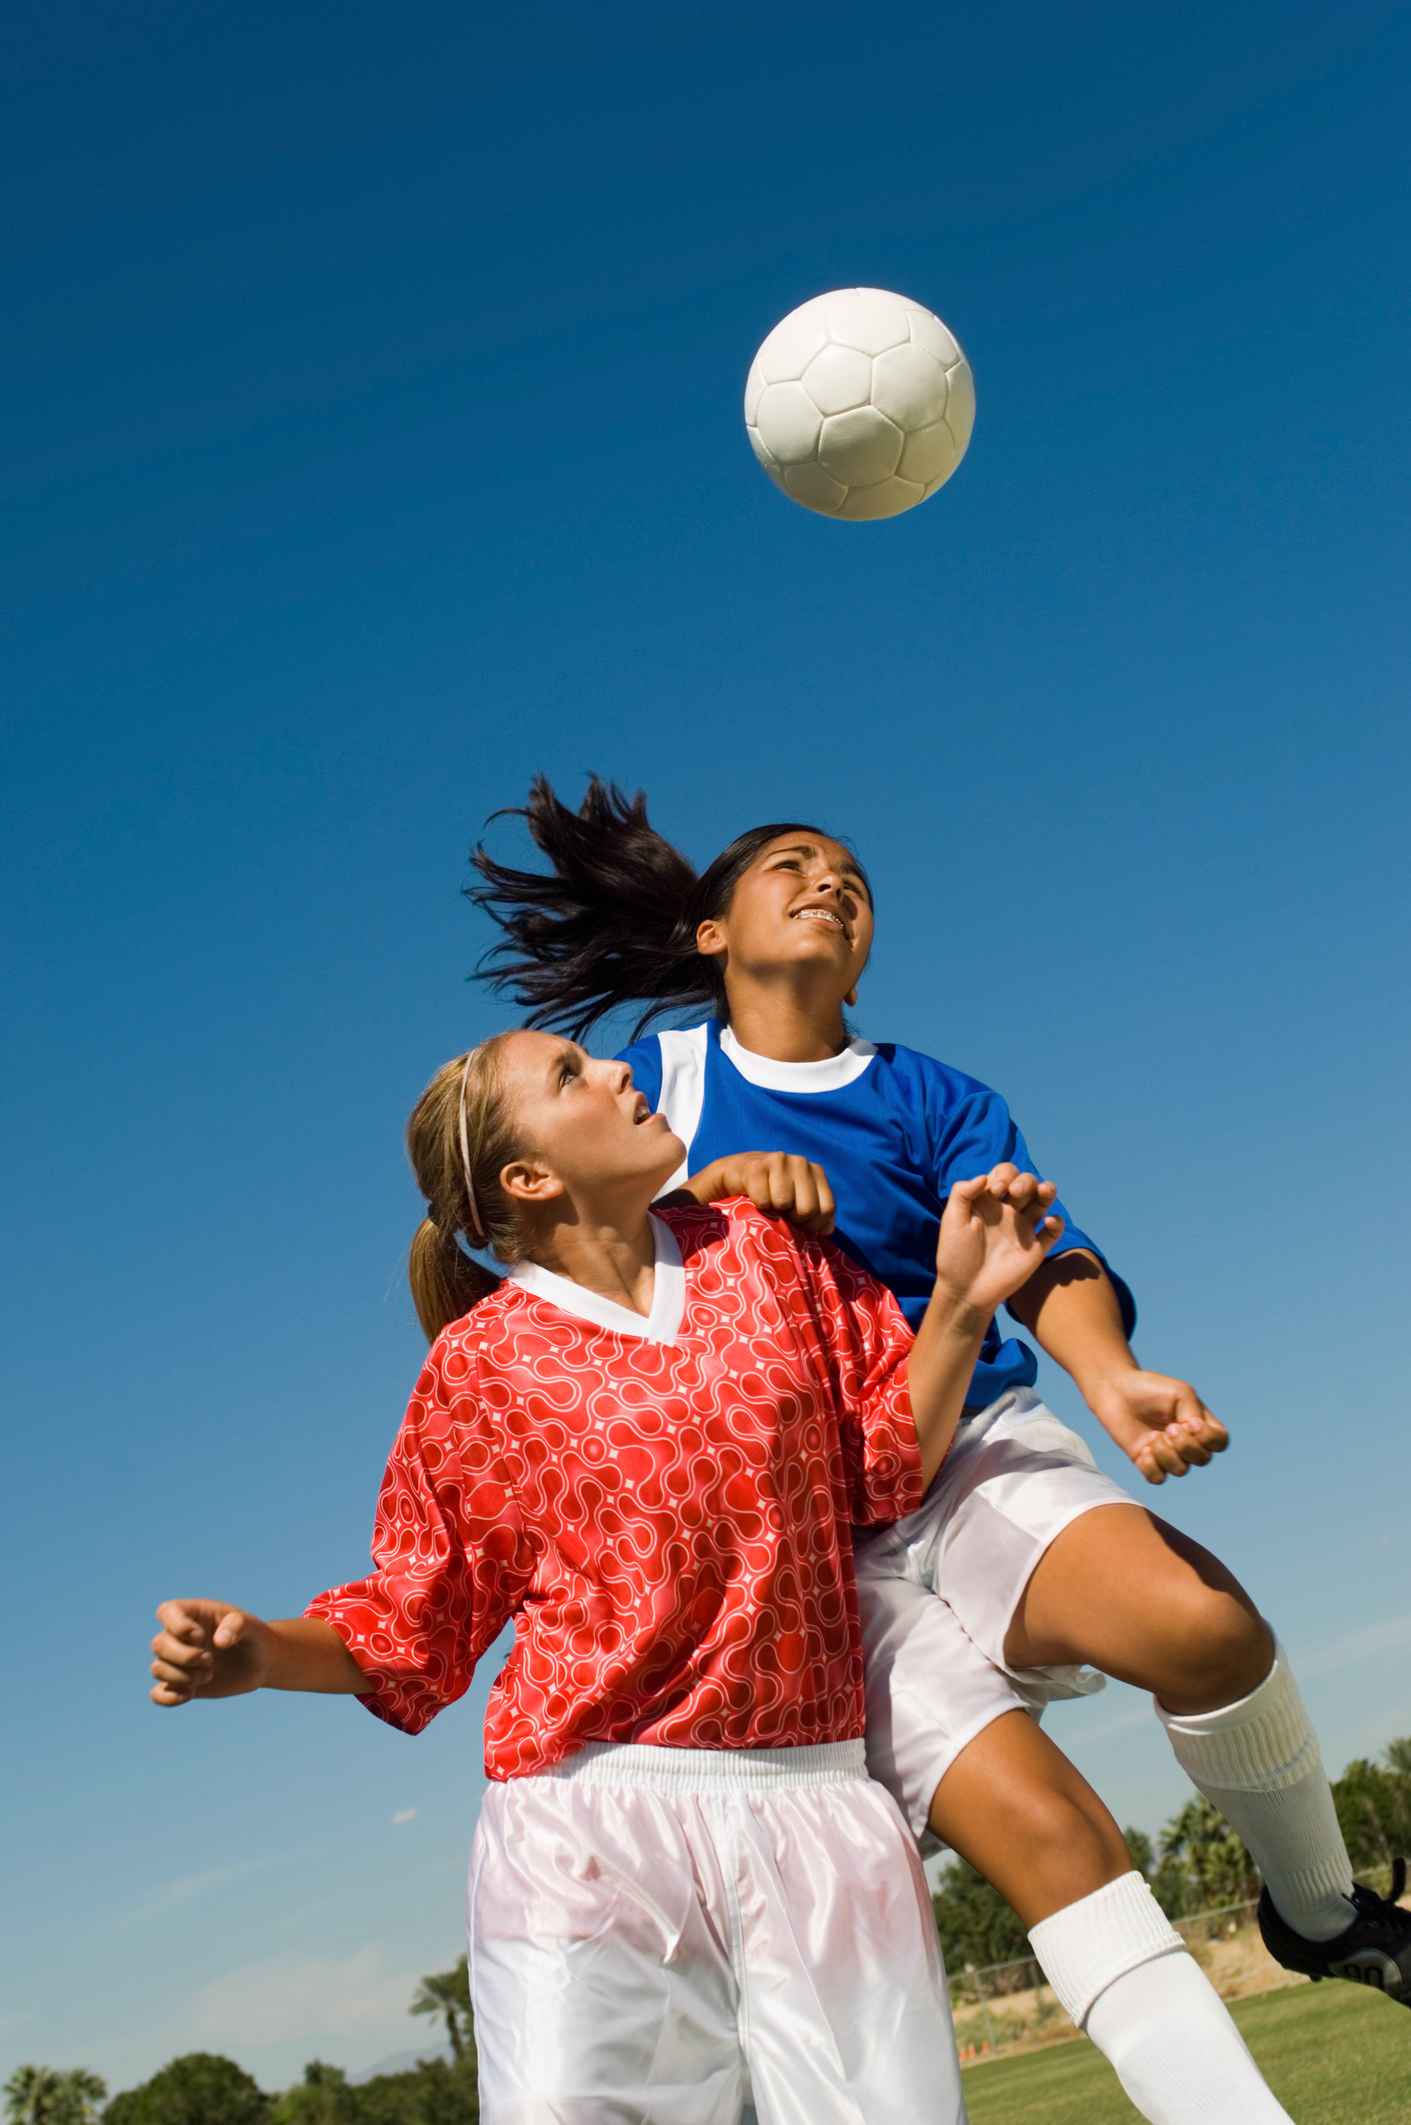 5 truths about concussions in soccer